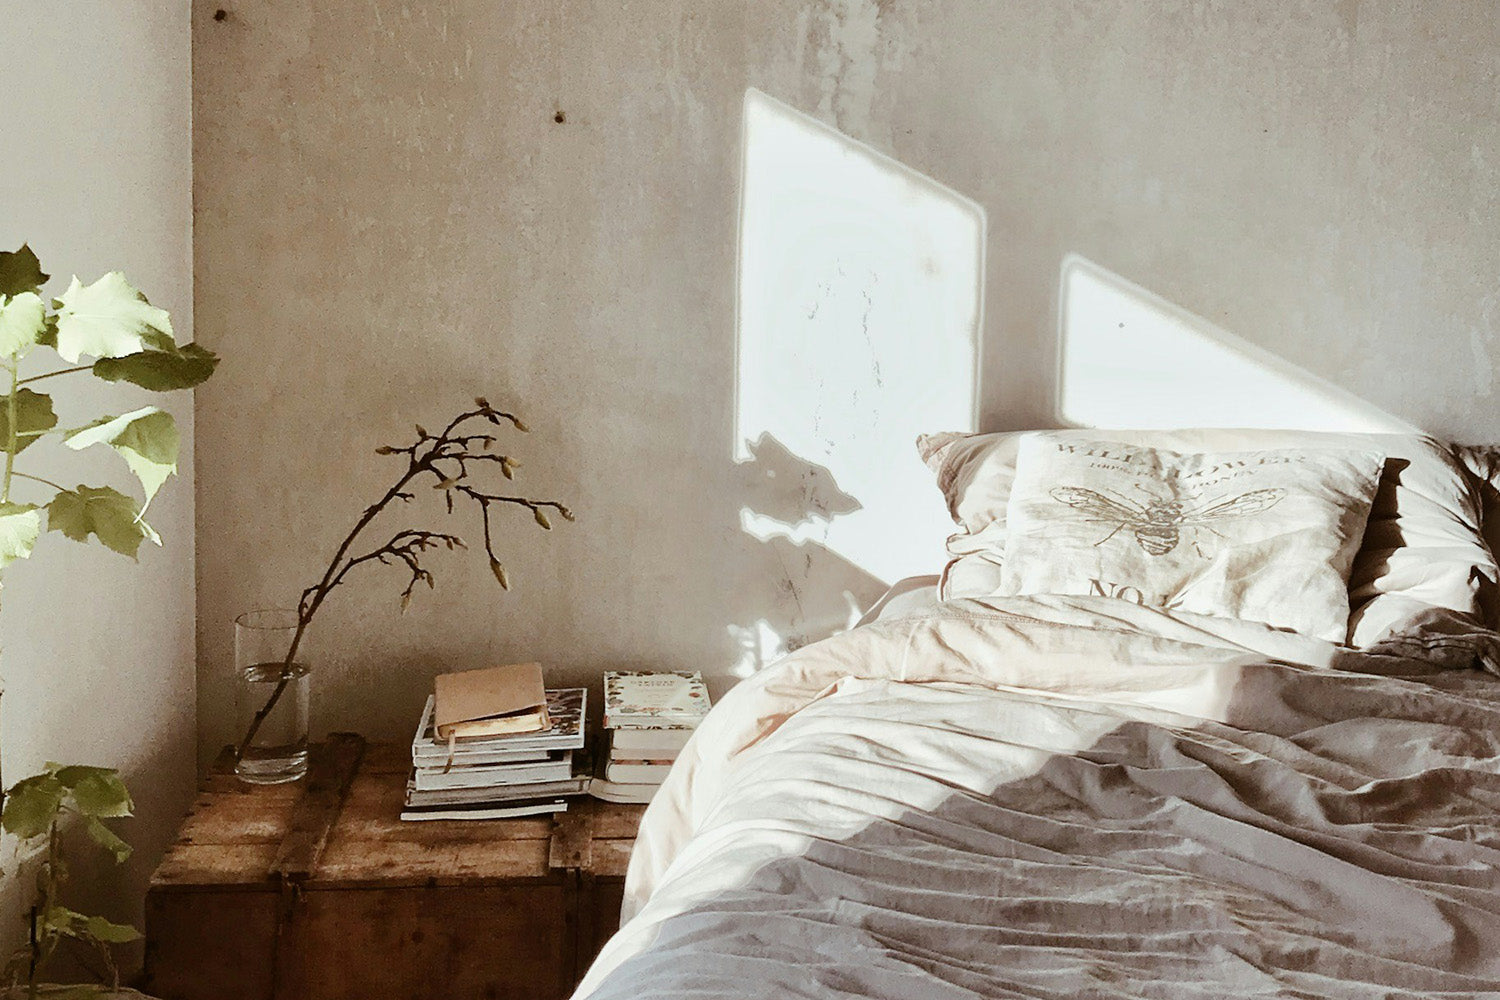 A bed with white bedding next to a stack of books on the floor